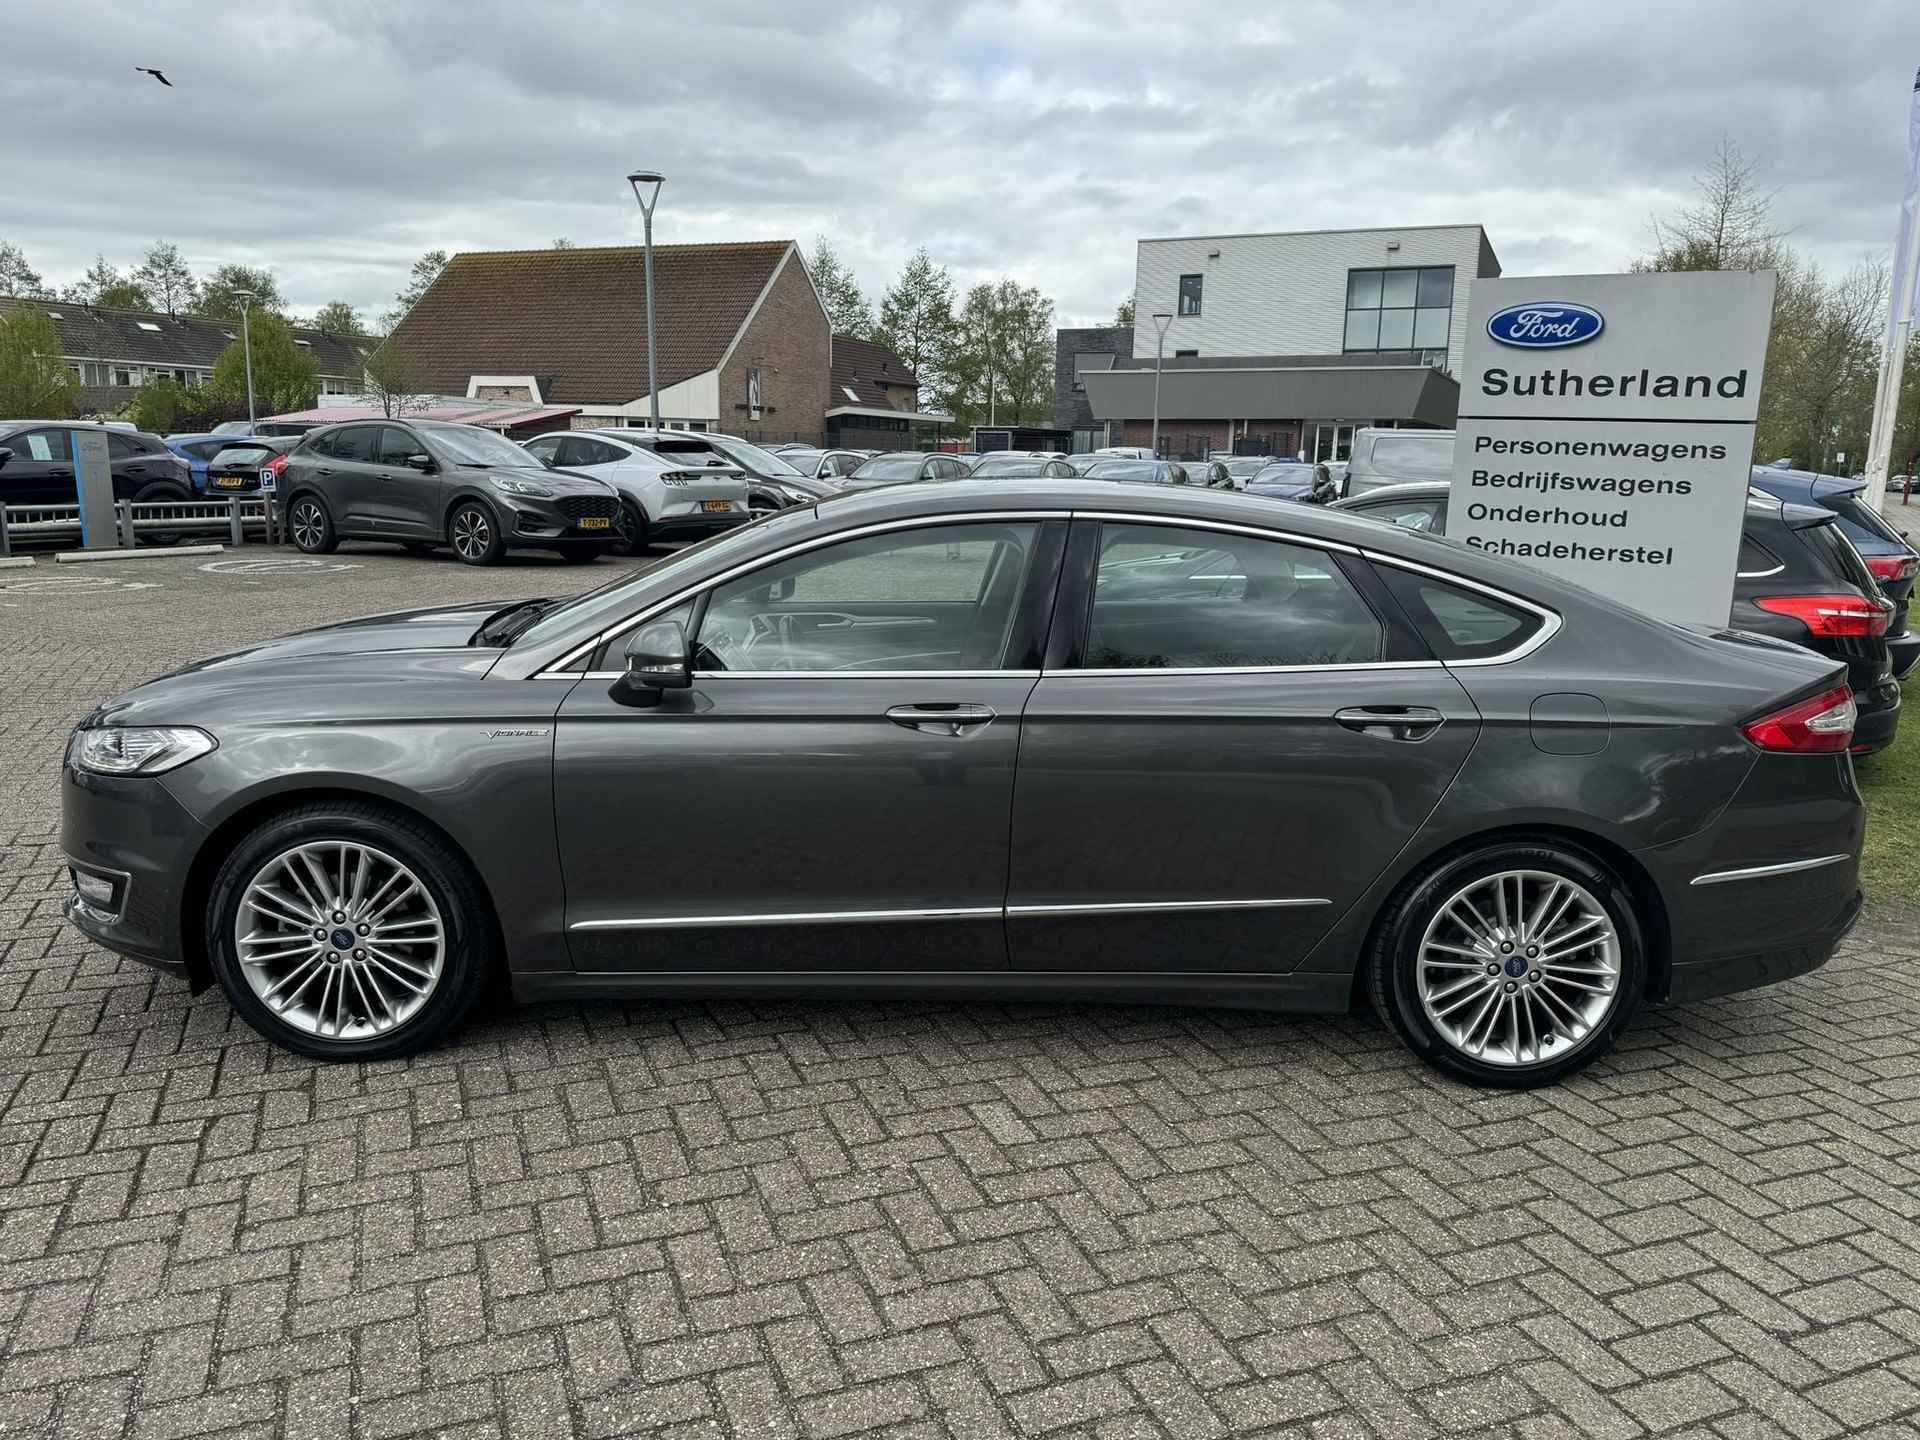 Ford Mondeo 2.0 IVCT HEV Vignale - 6/33